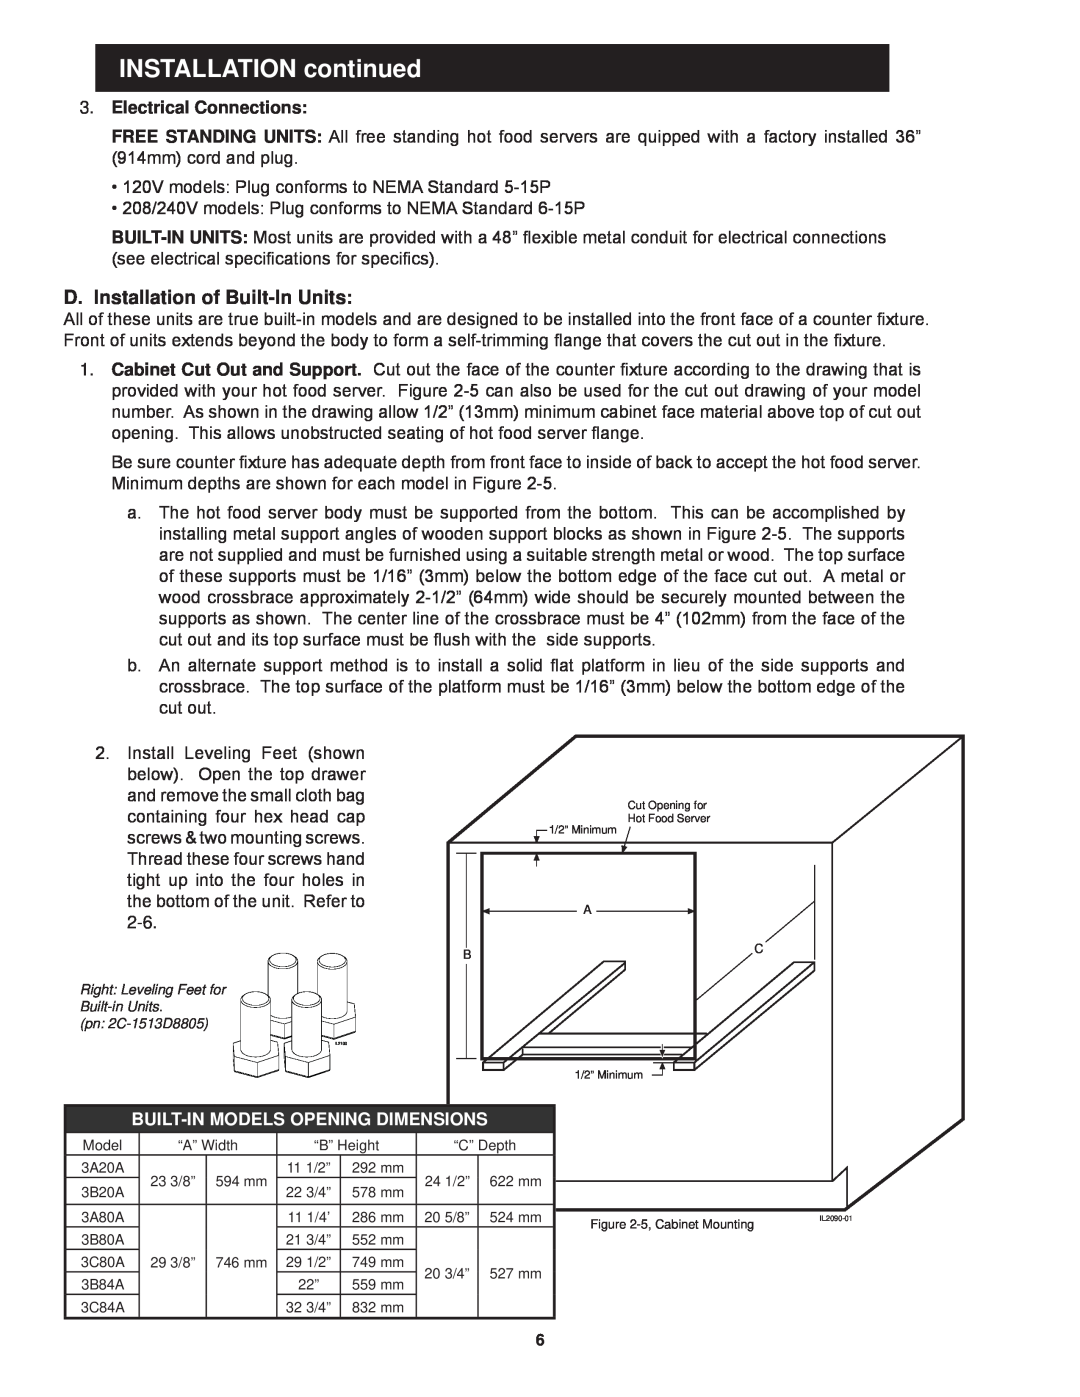 Toastmaster 3B84A, 3C84A, 3B84D, 3B20A manual INSTALLATION continued, D. Installation of Built-InUnits, Electrical Connections 